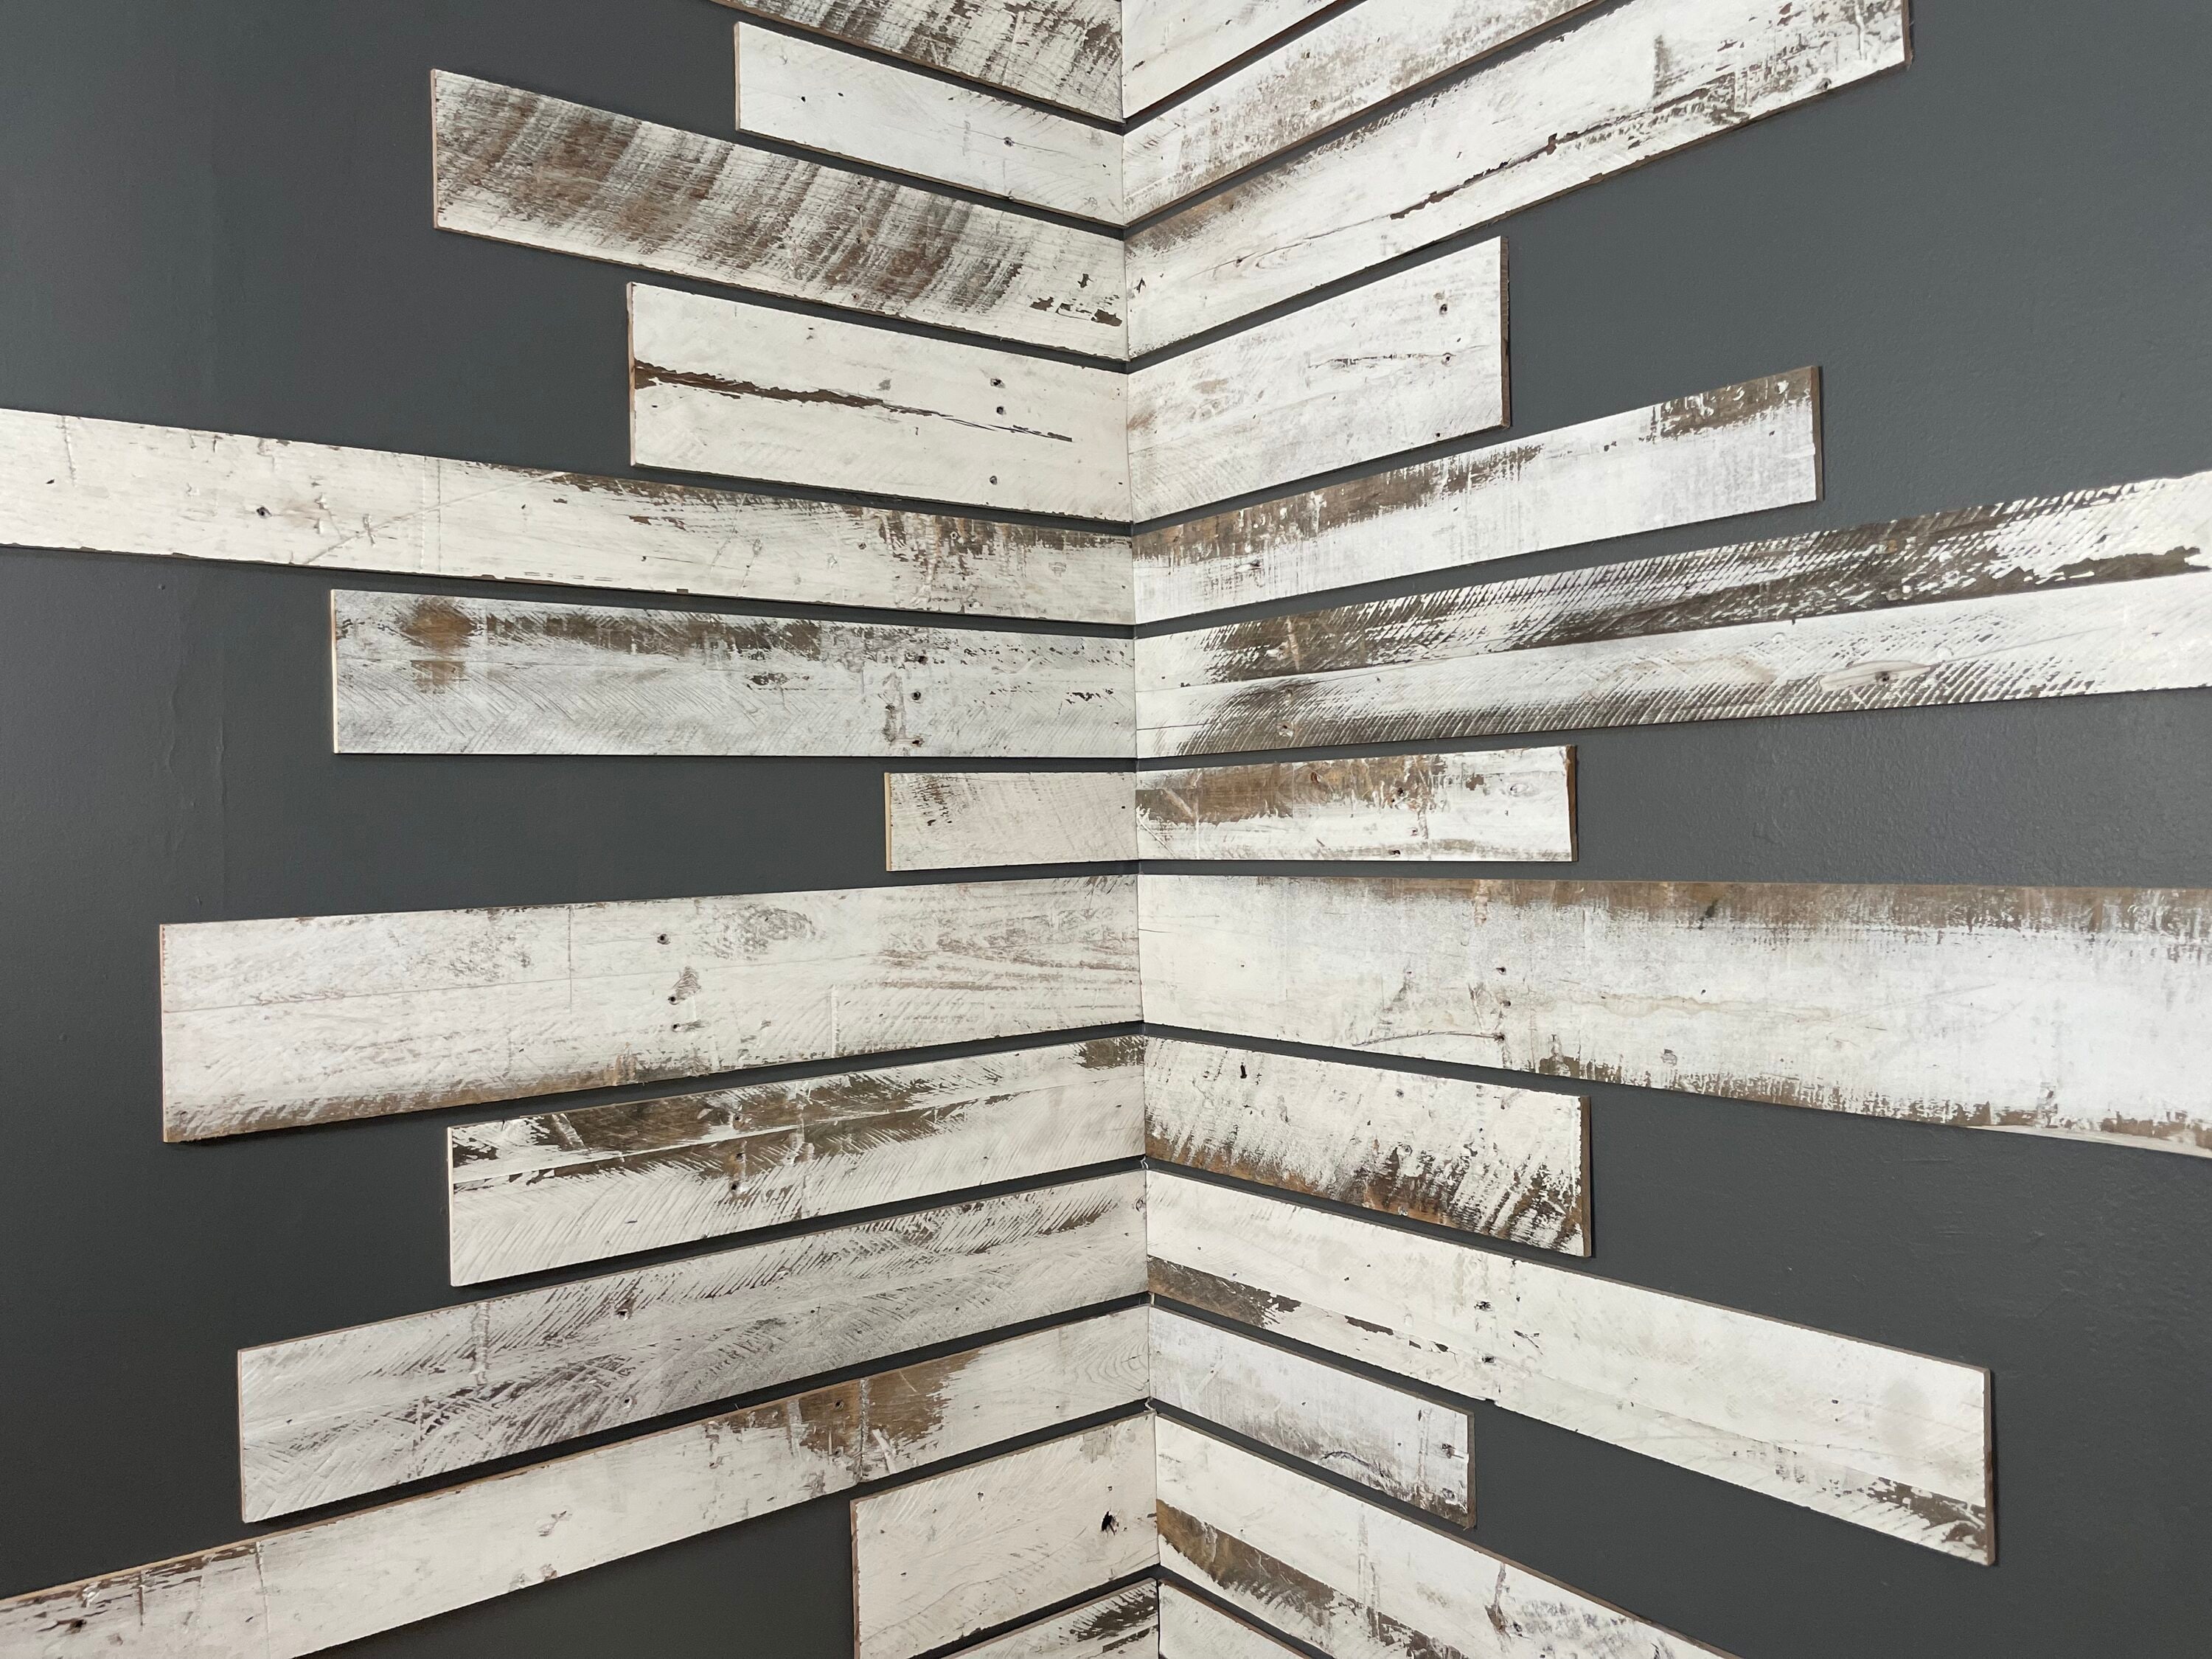 BarnwoodUSA 15 in. x 12 in. White Wash Reclaimed Old Wooden Wall